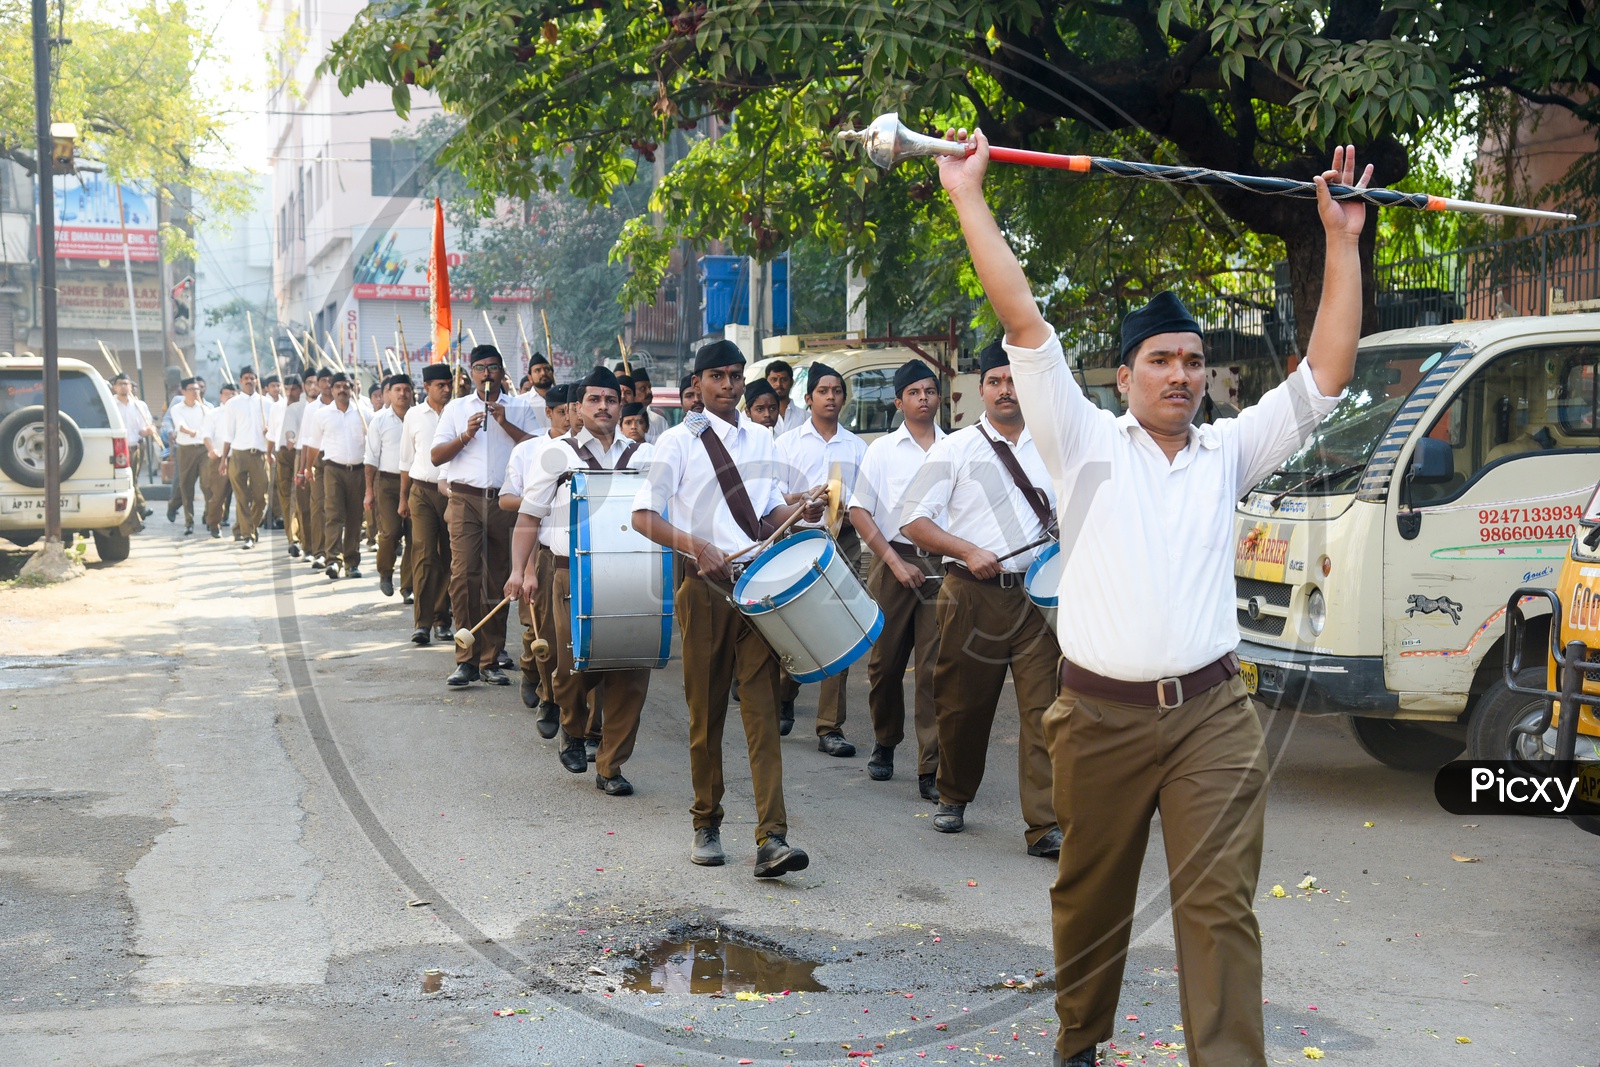 RSS Parade